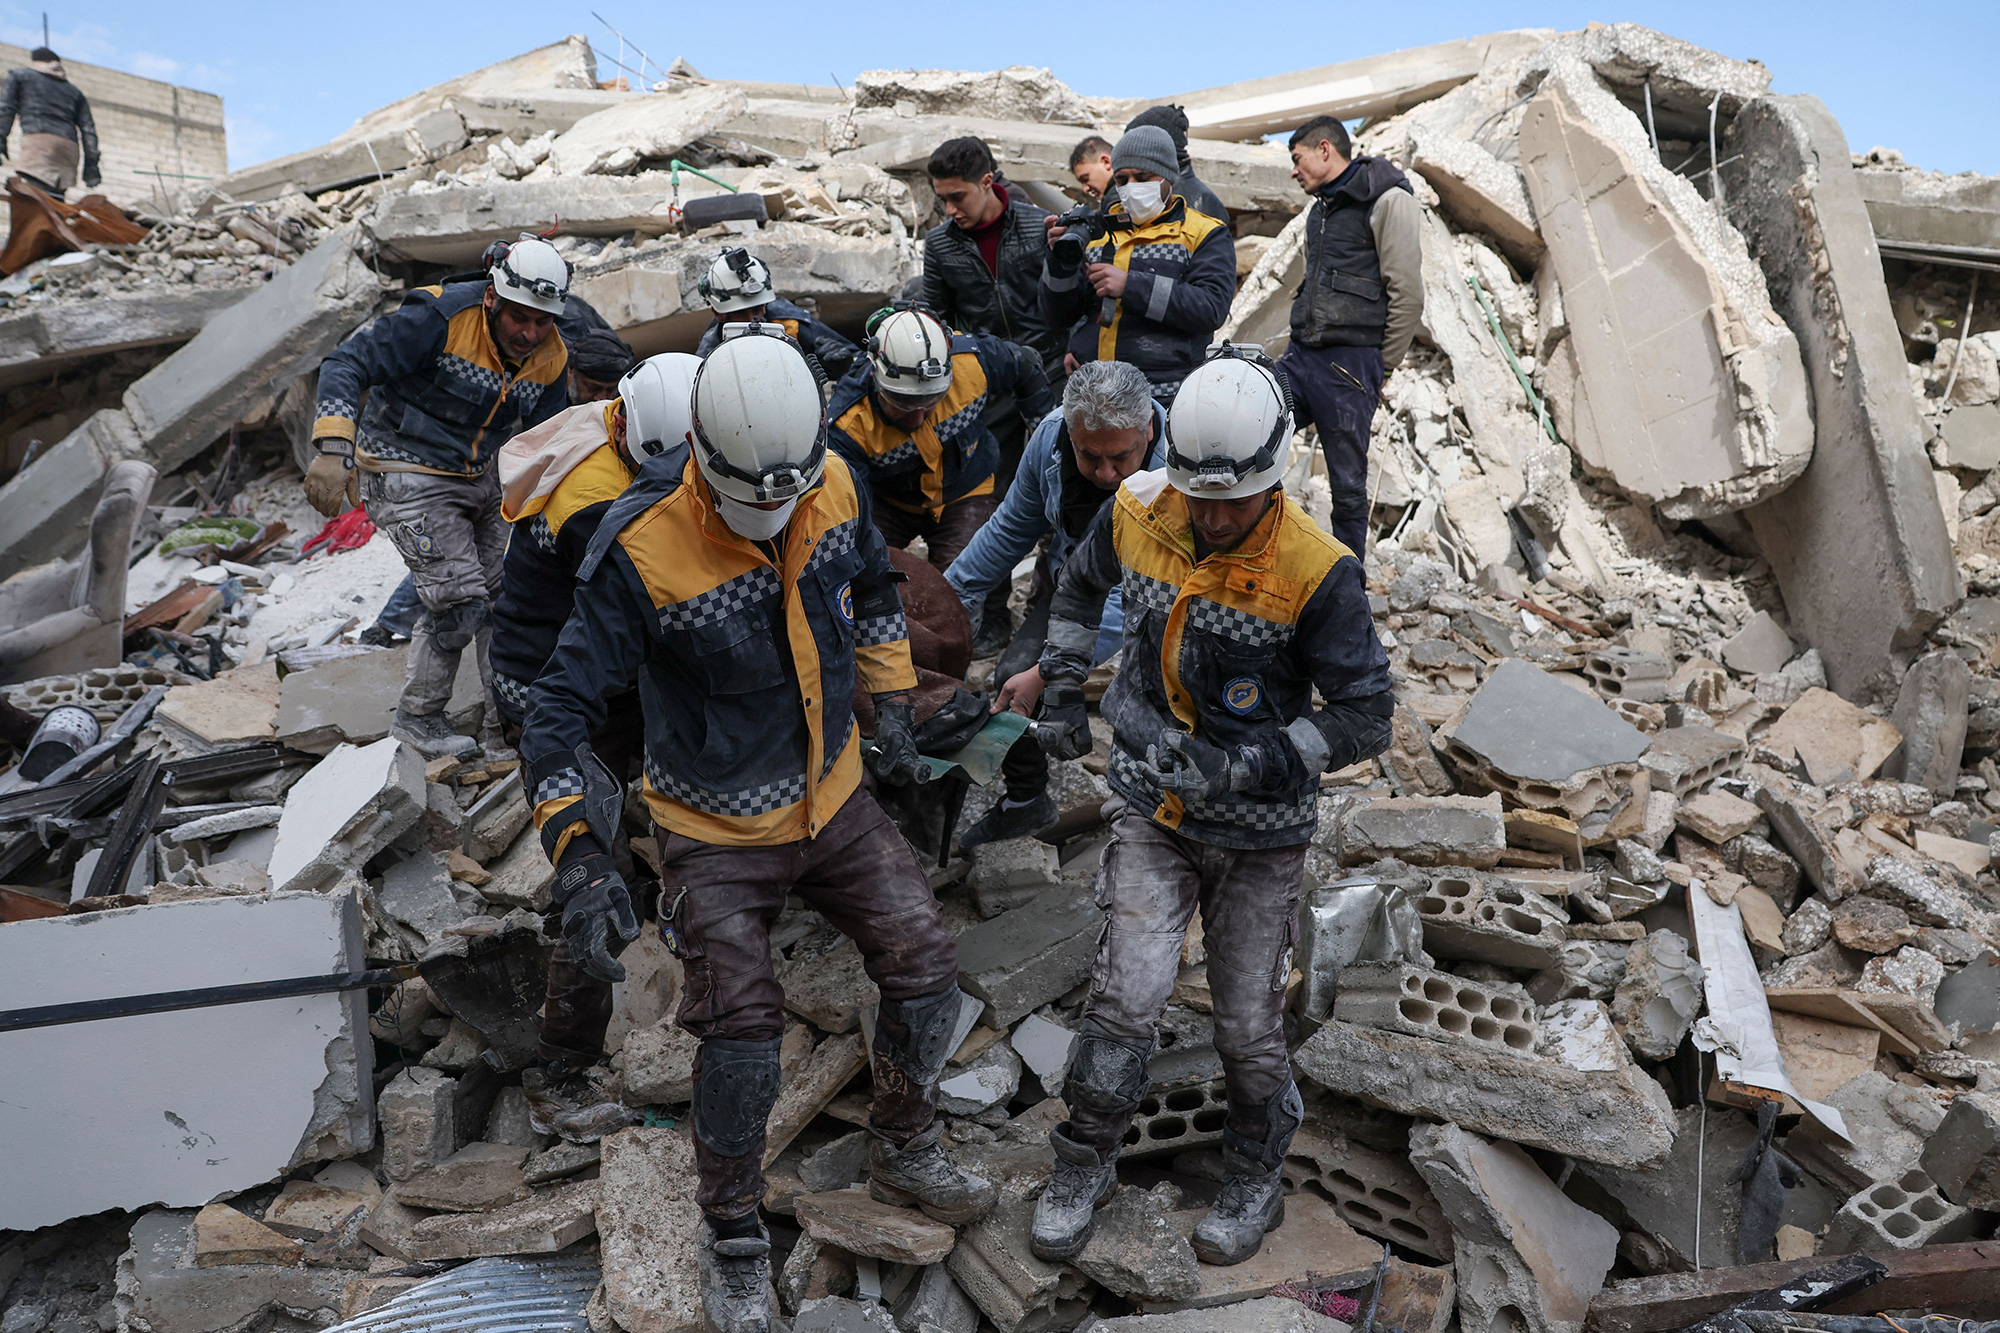 Members of the Syrian civil defense, known as the White Helmets, transport a casualty from the rubble of buildings in the village of Azmarin in Syria's rebel-held northwestern Idlib province on February 7.